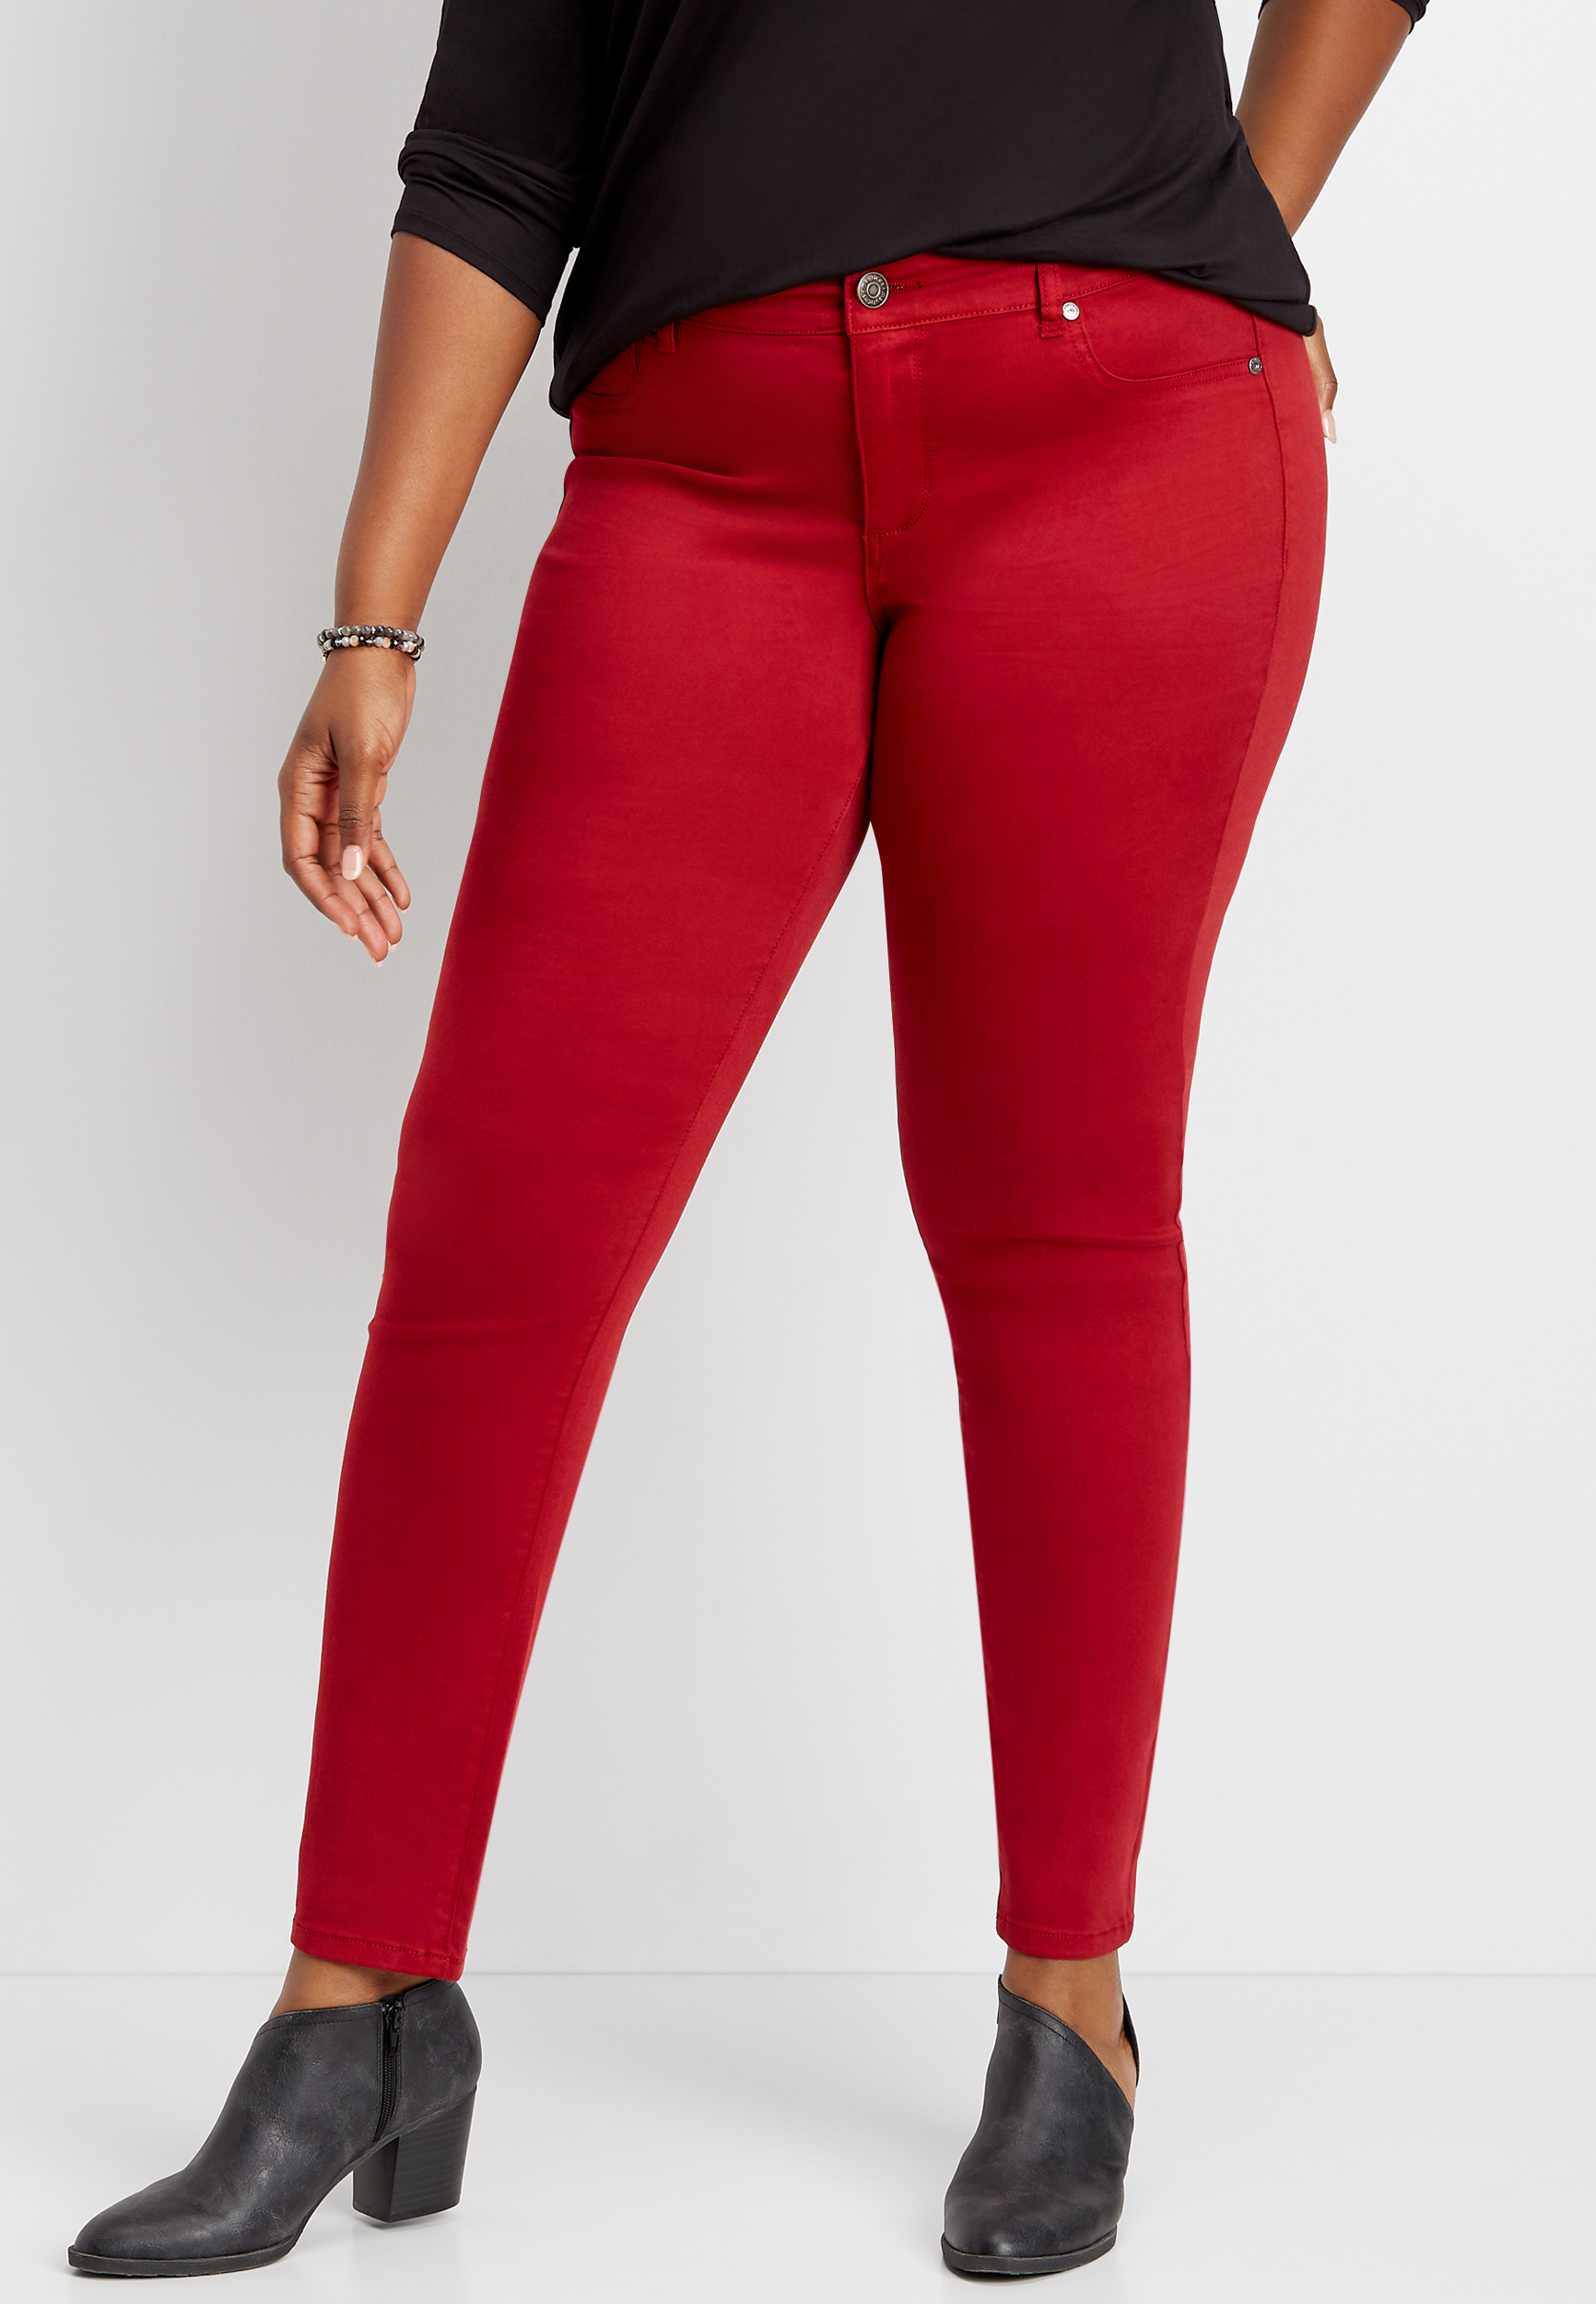 red jeggings plus size